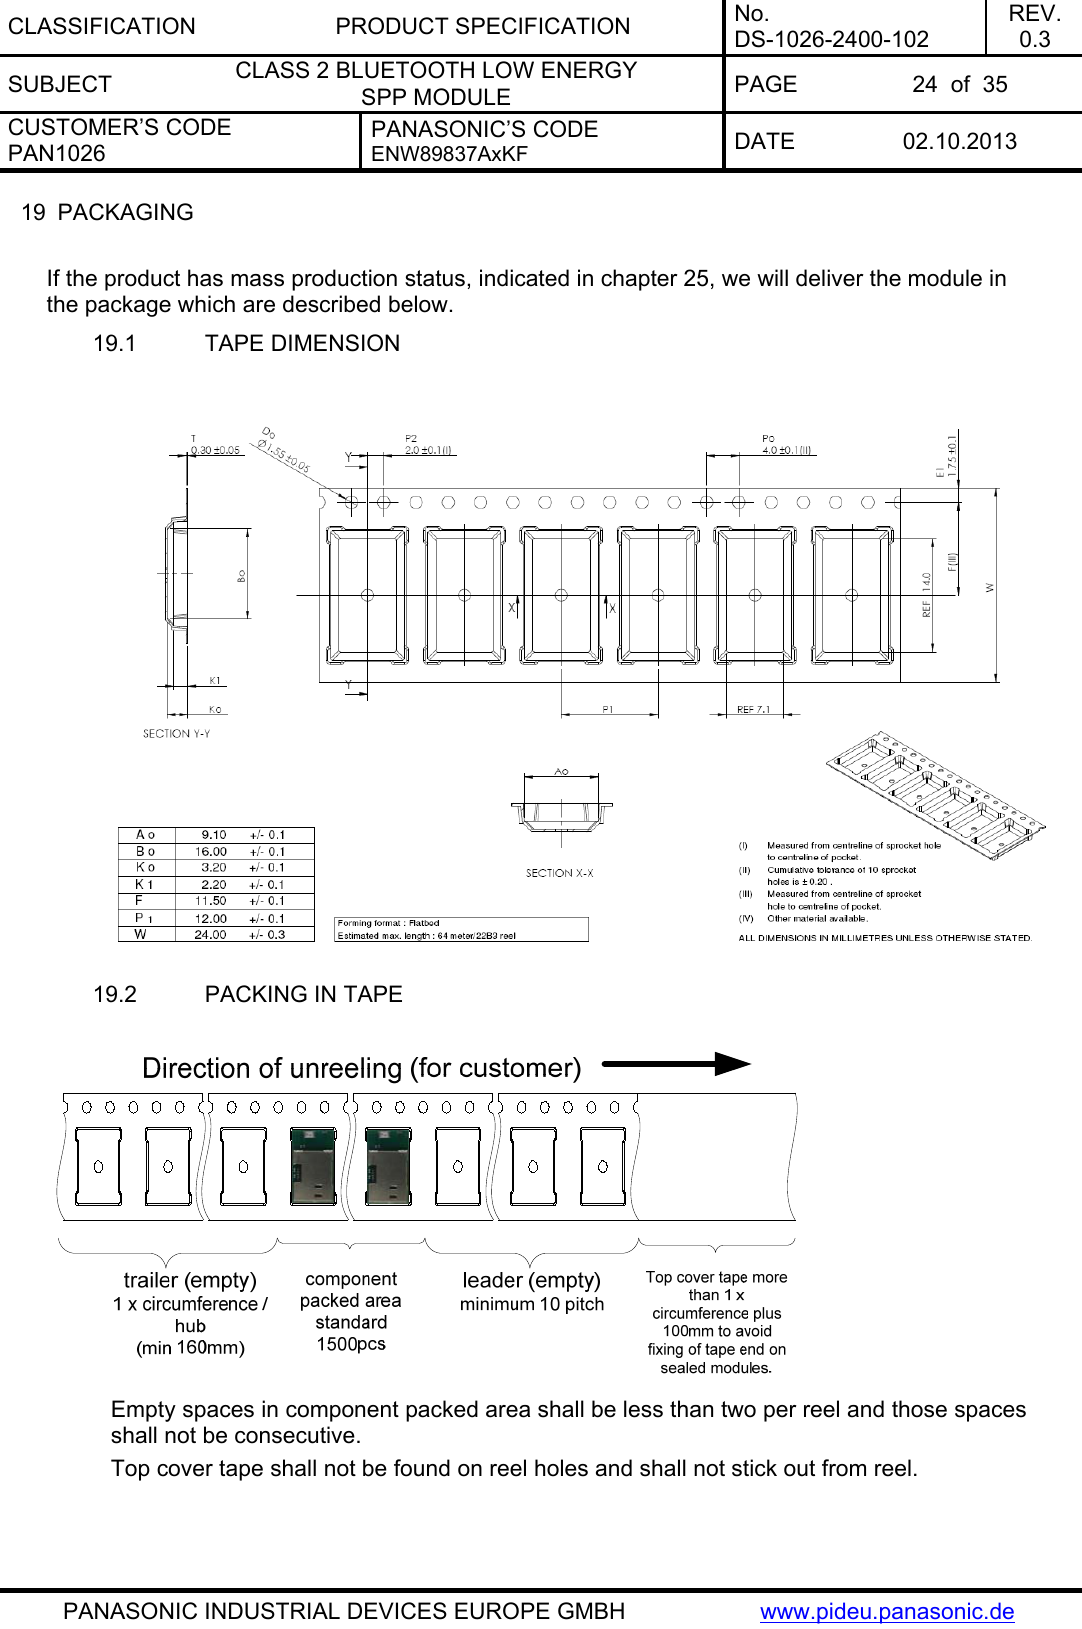 CLASSIFICATION PRODUCT SPECIFICATION No. DS-1026-2400-102 REV. 0.3 SUBJECT  CLASS 2 BLUETOOTH LOW ENERGY  SPP MODULE  PAGE  24  of  35 CUSTOMER’S CODE PAN1026 PANASONIC’S CODE ENW89837AxKF  DATE 02.10.2013   PANASONIC INDUSTRIAL DEVICES EUROPE GMBH  www.pideu.panasonic.de 19  PACKAGING  If the product has mass production status, indicated in chapter 25, we will deliver the module in the package which are described below. 19.1  TAPE DIMENSION   19.2  PACKING IN TAPE   Empty spaces in component packed area shall be less than two per reel and those spaces shall not be consecutive. Top cover tape shall not be found on reel holes and shall not stick out from reel.   